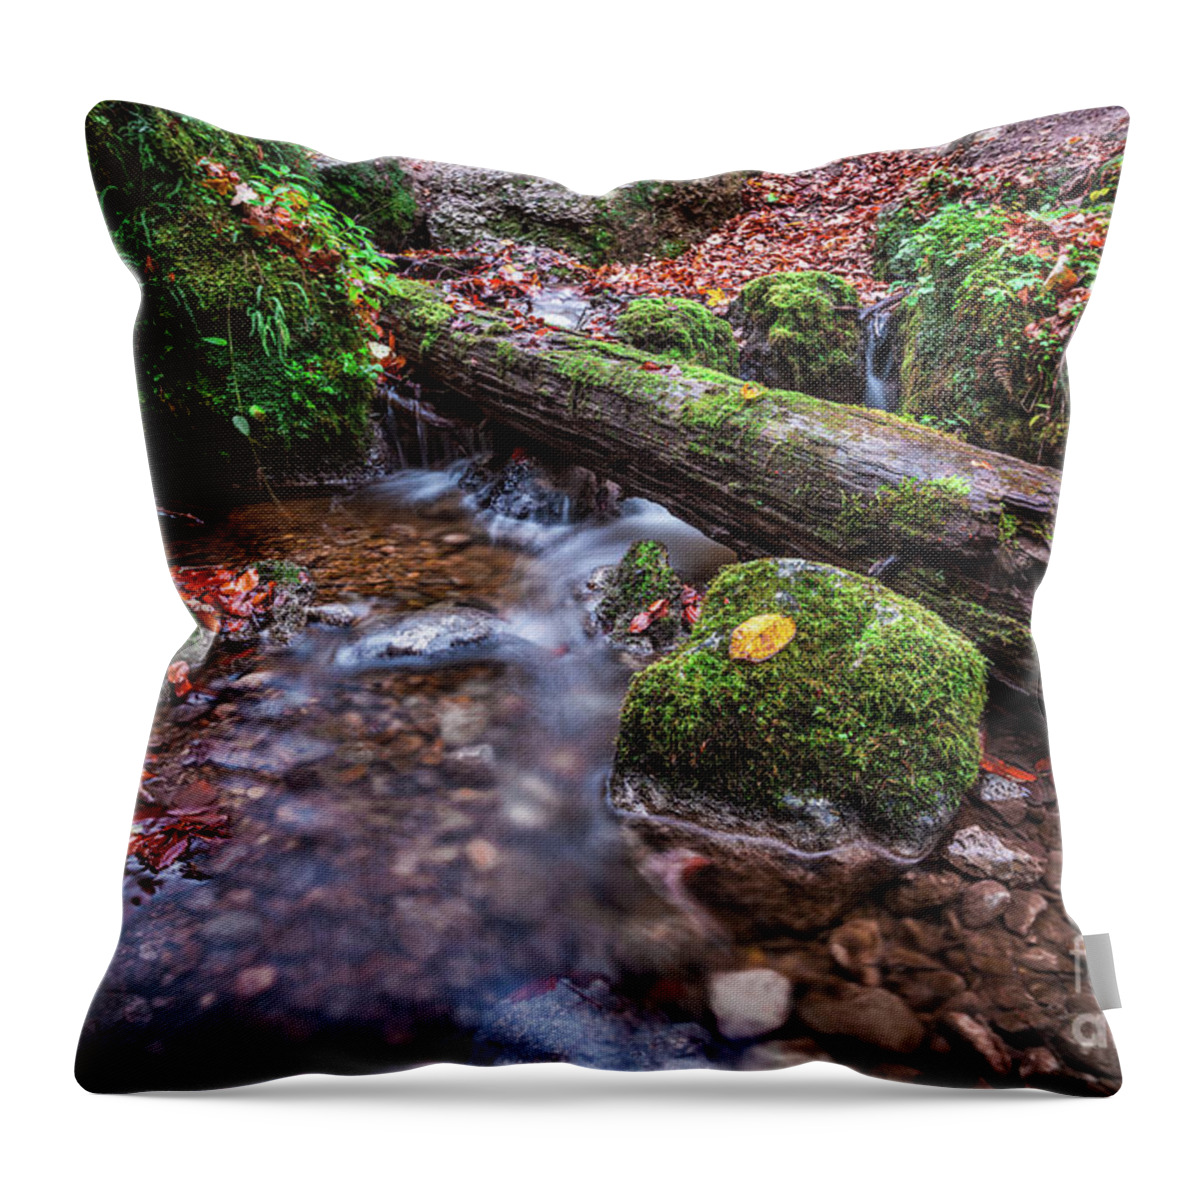 Autumn Throw Pillow featuring the photograph Fall In The Woods by Hannes Cmarits